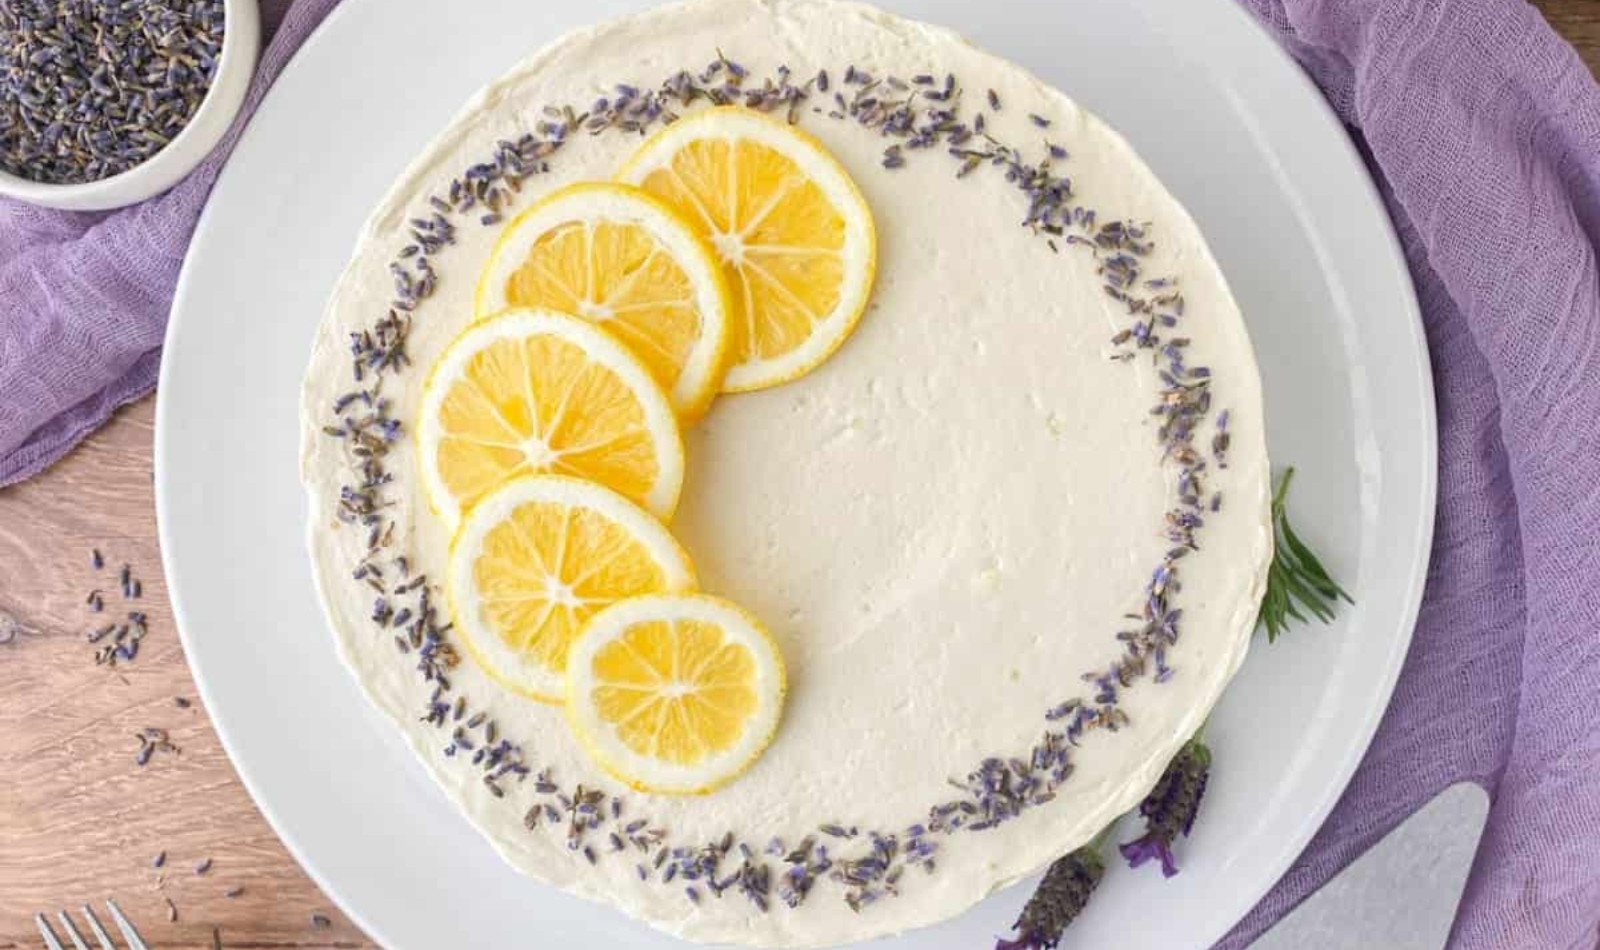  a lavender lemon cake garnished with bright yellow lemon slices and lavender flowers